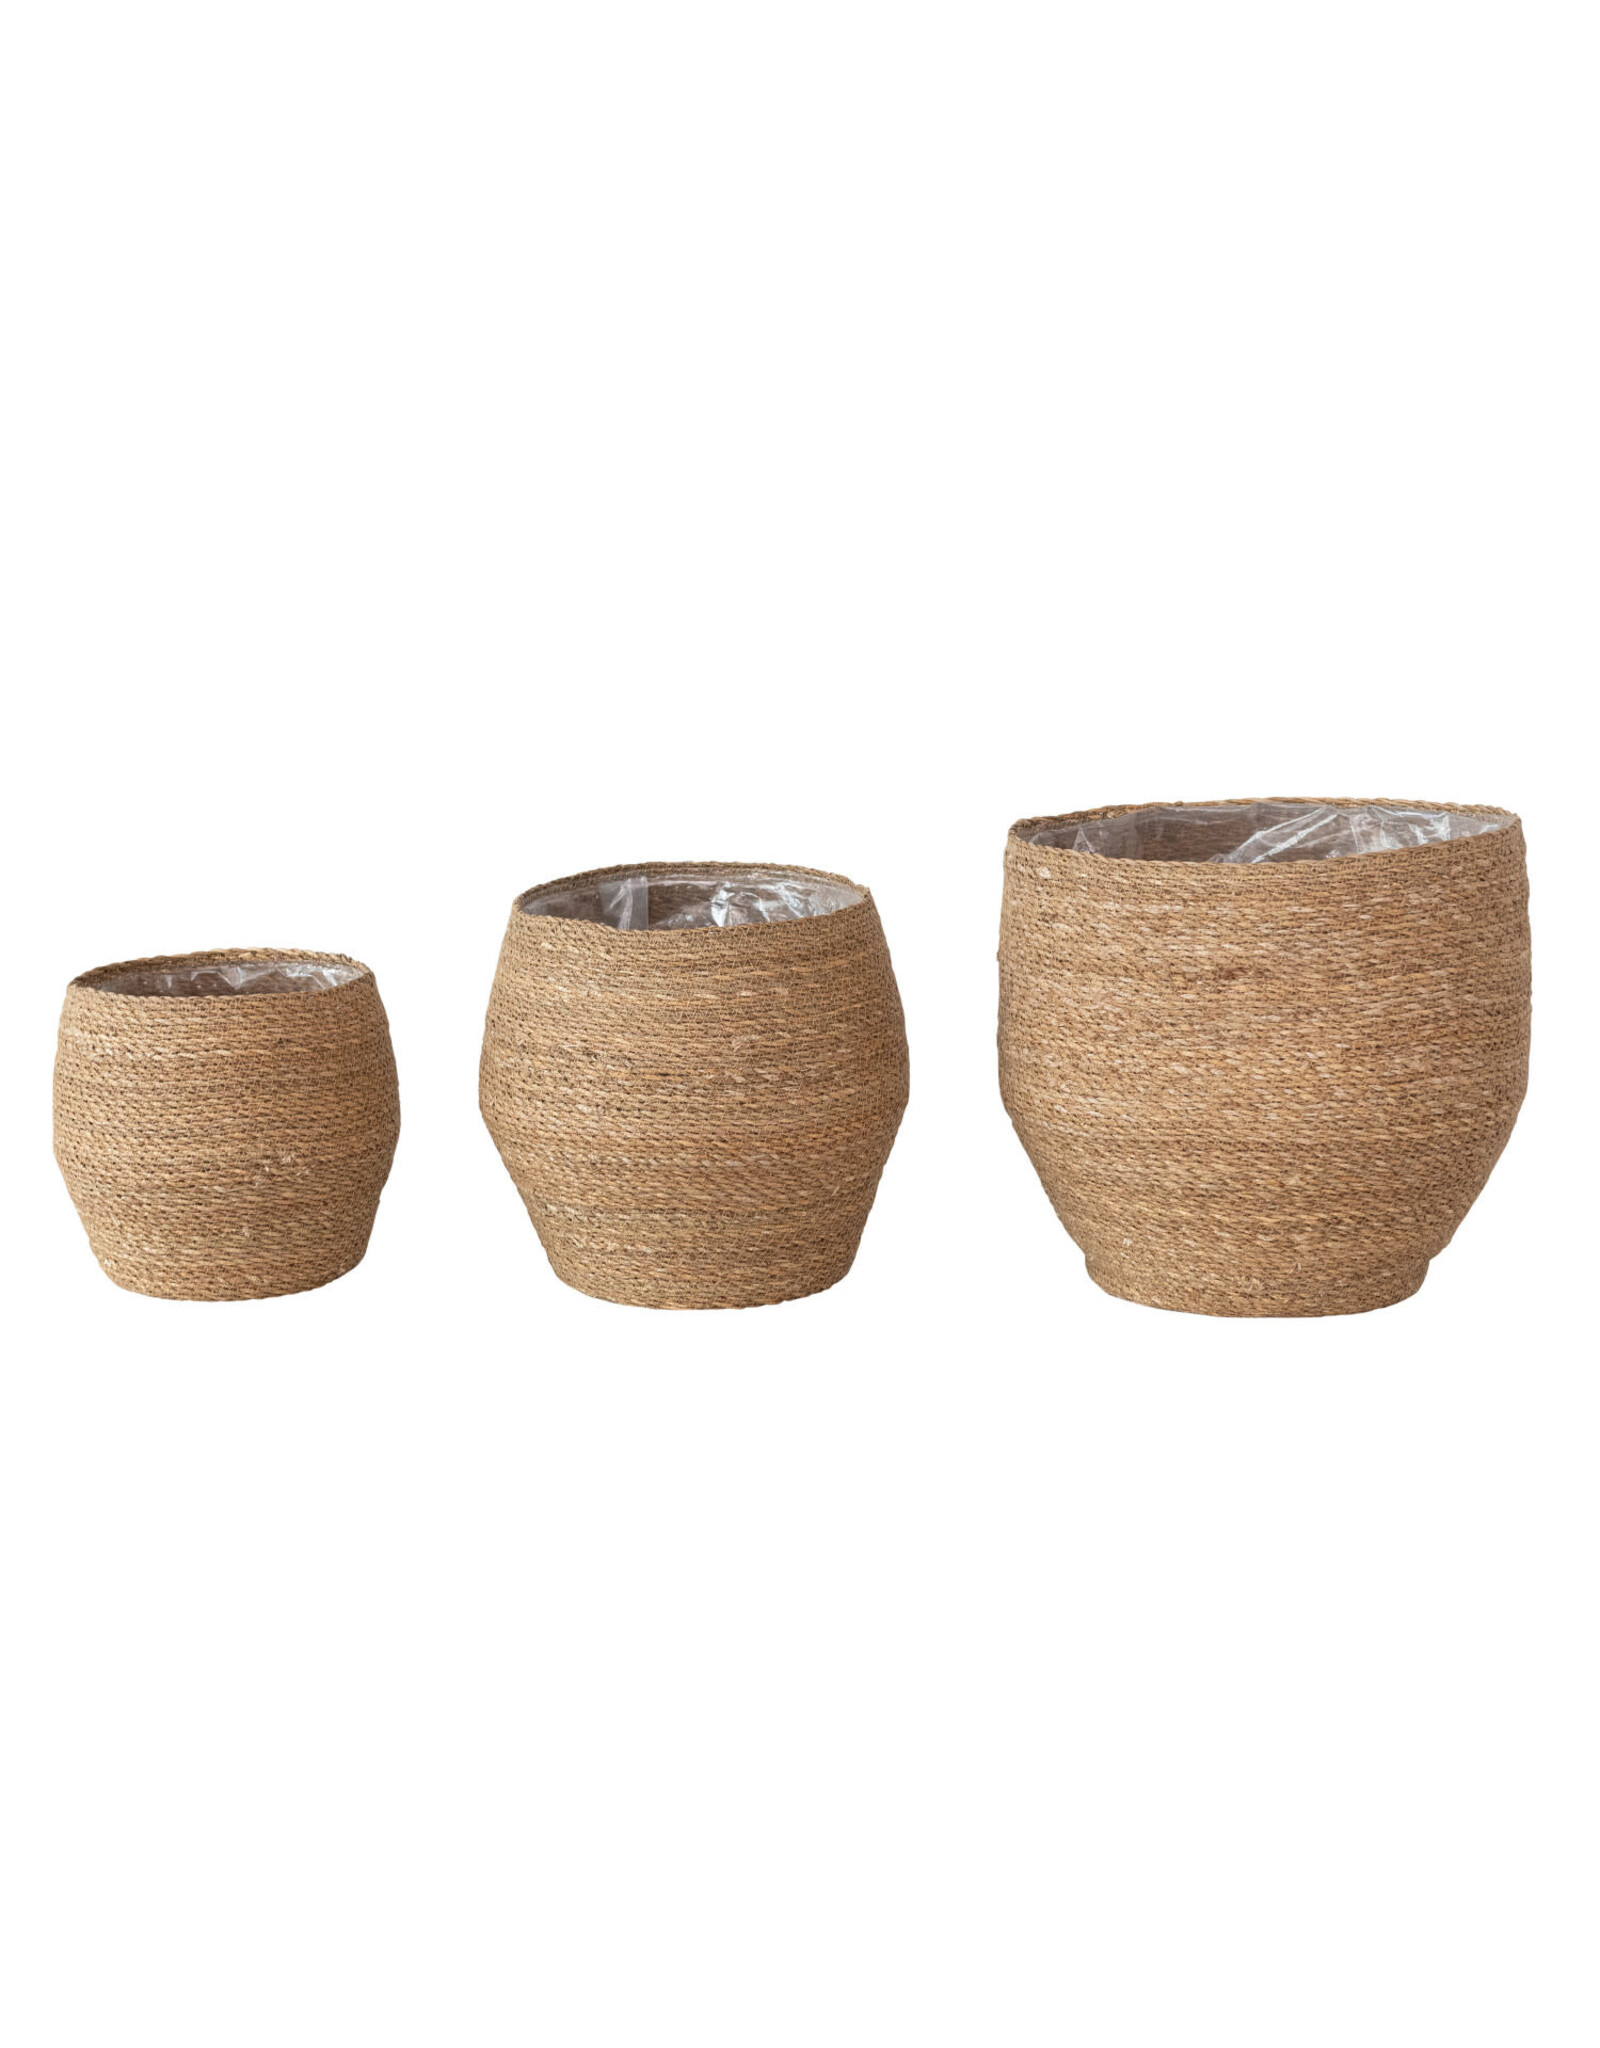 Woven Seagrass Baskets W/ Plastic Lining